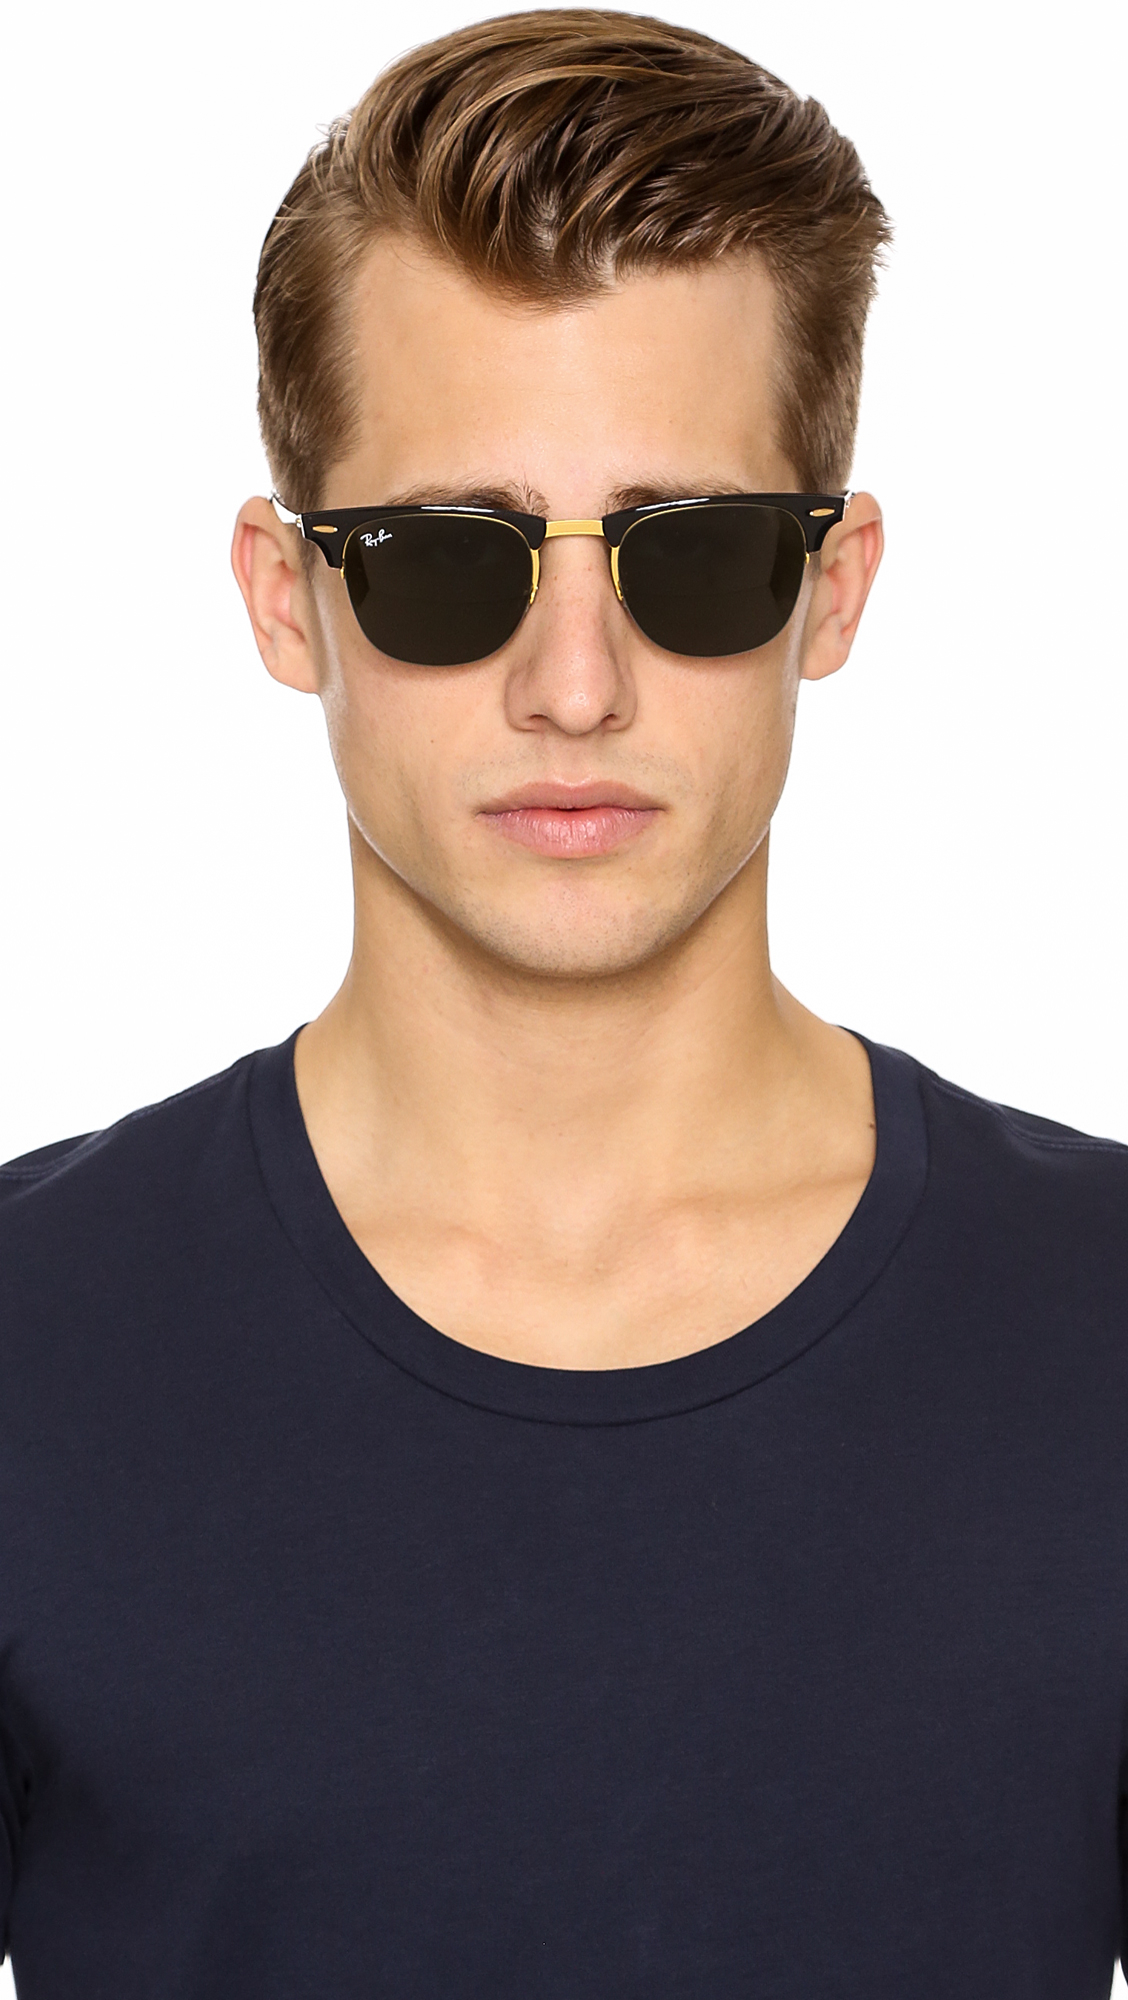 Ray-Ban Clubmaster Sunglasses in Metallic for Men - Lyst